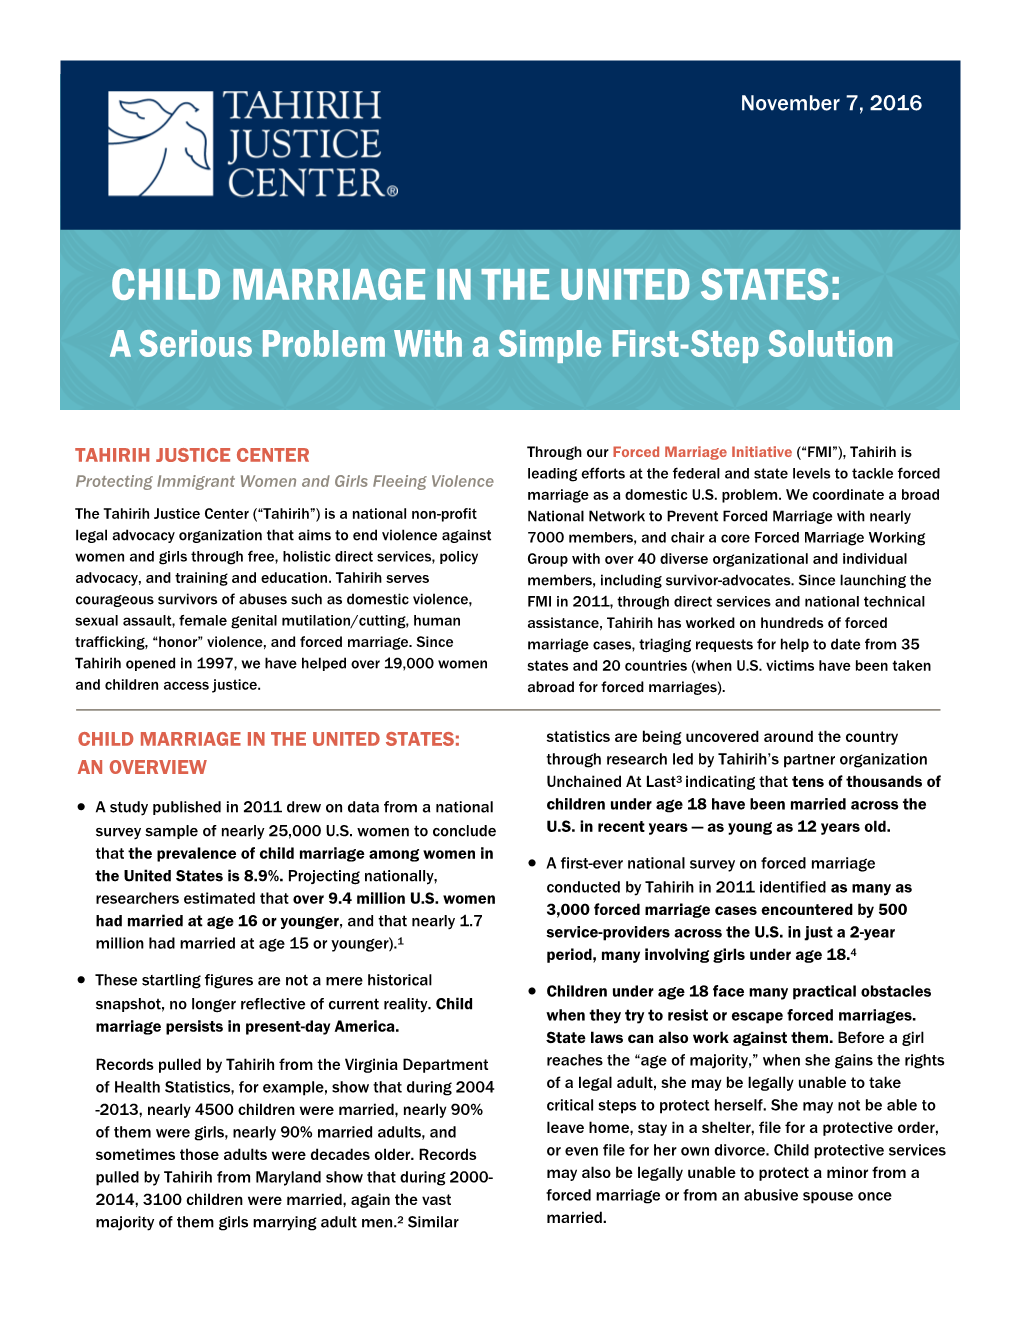 CHILD MARRIAGE in the UNITED STATES: a Serious Problem with a Simple First-Step Solution